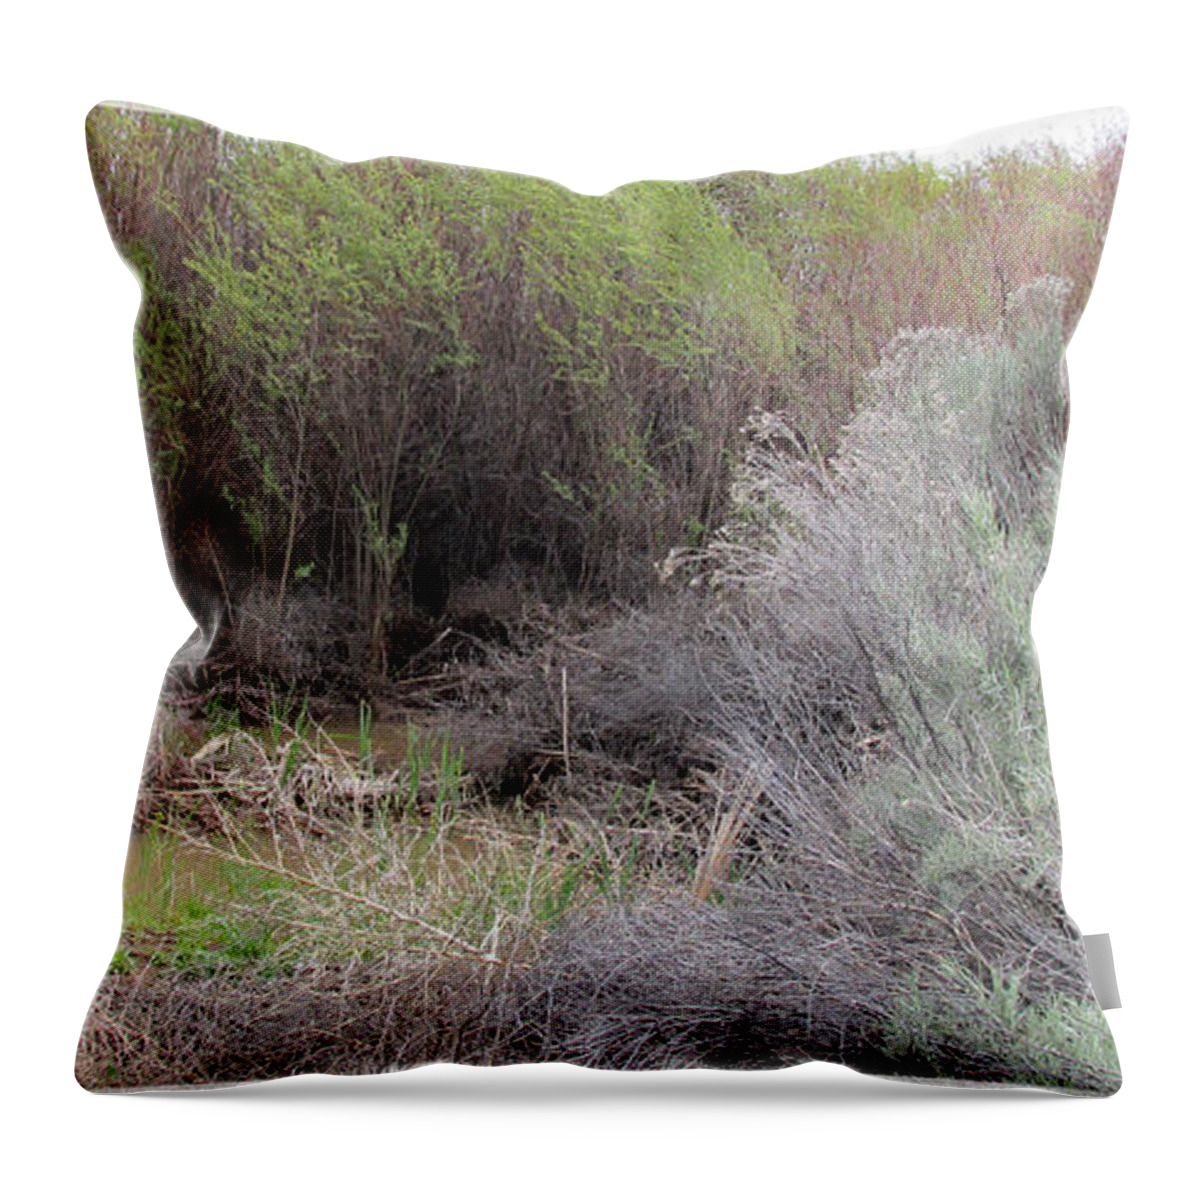 Woman Warrior Throw Pillow featuring the photograph Woman Warrior Guide by Feather Redfox